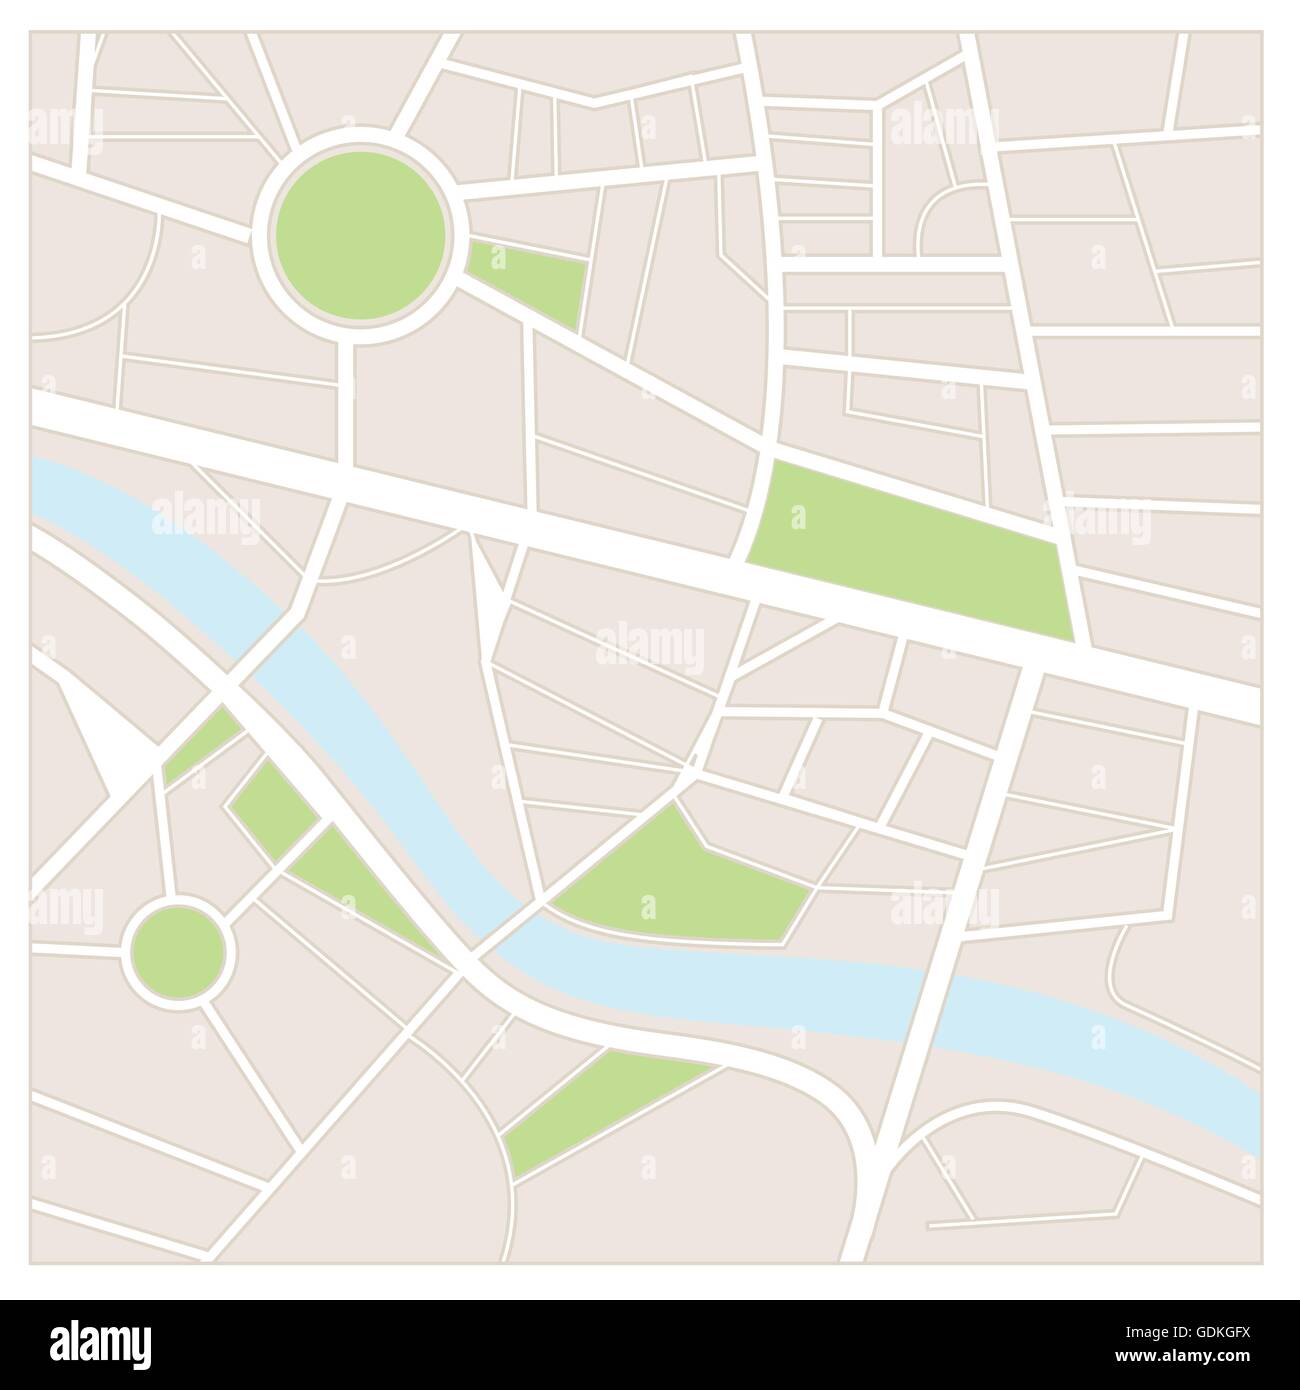 City map with streets, gardens and a river Stock Vector